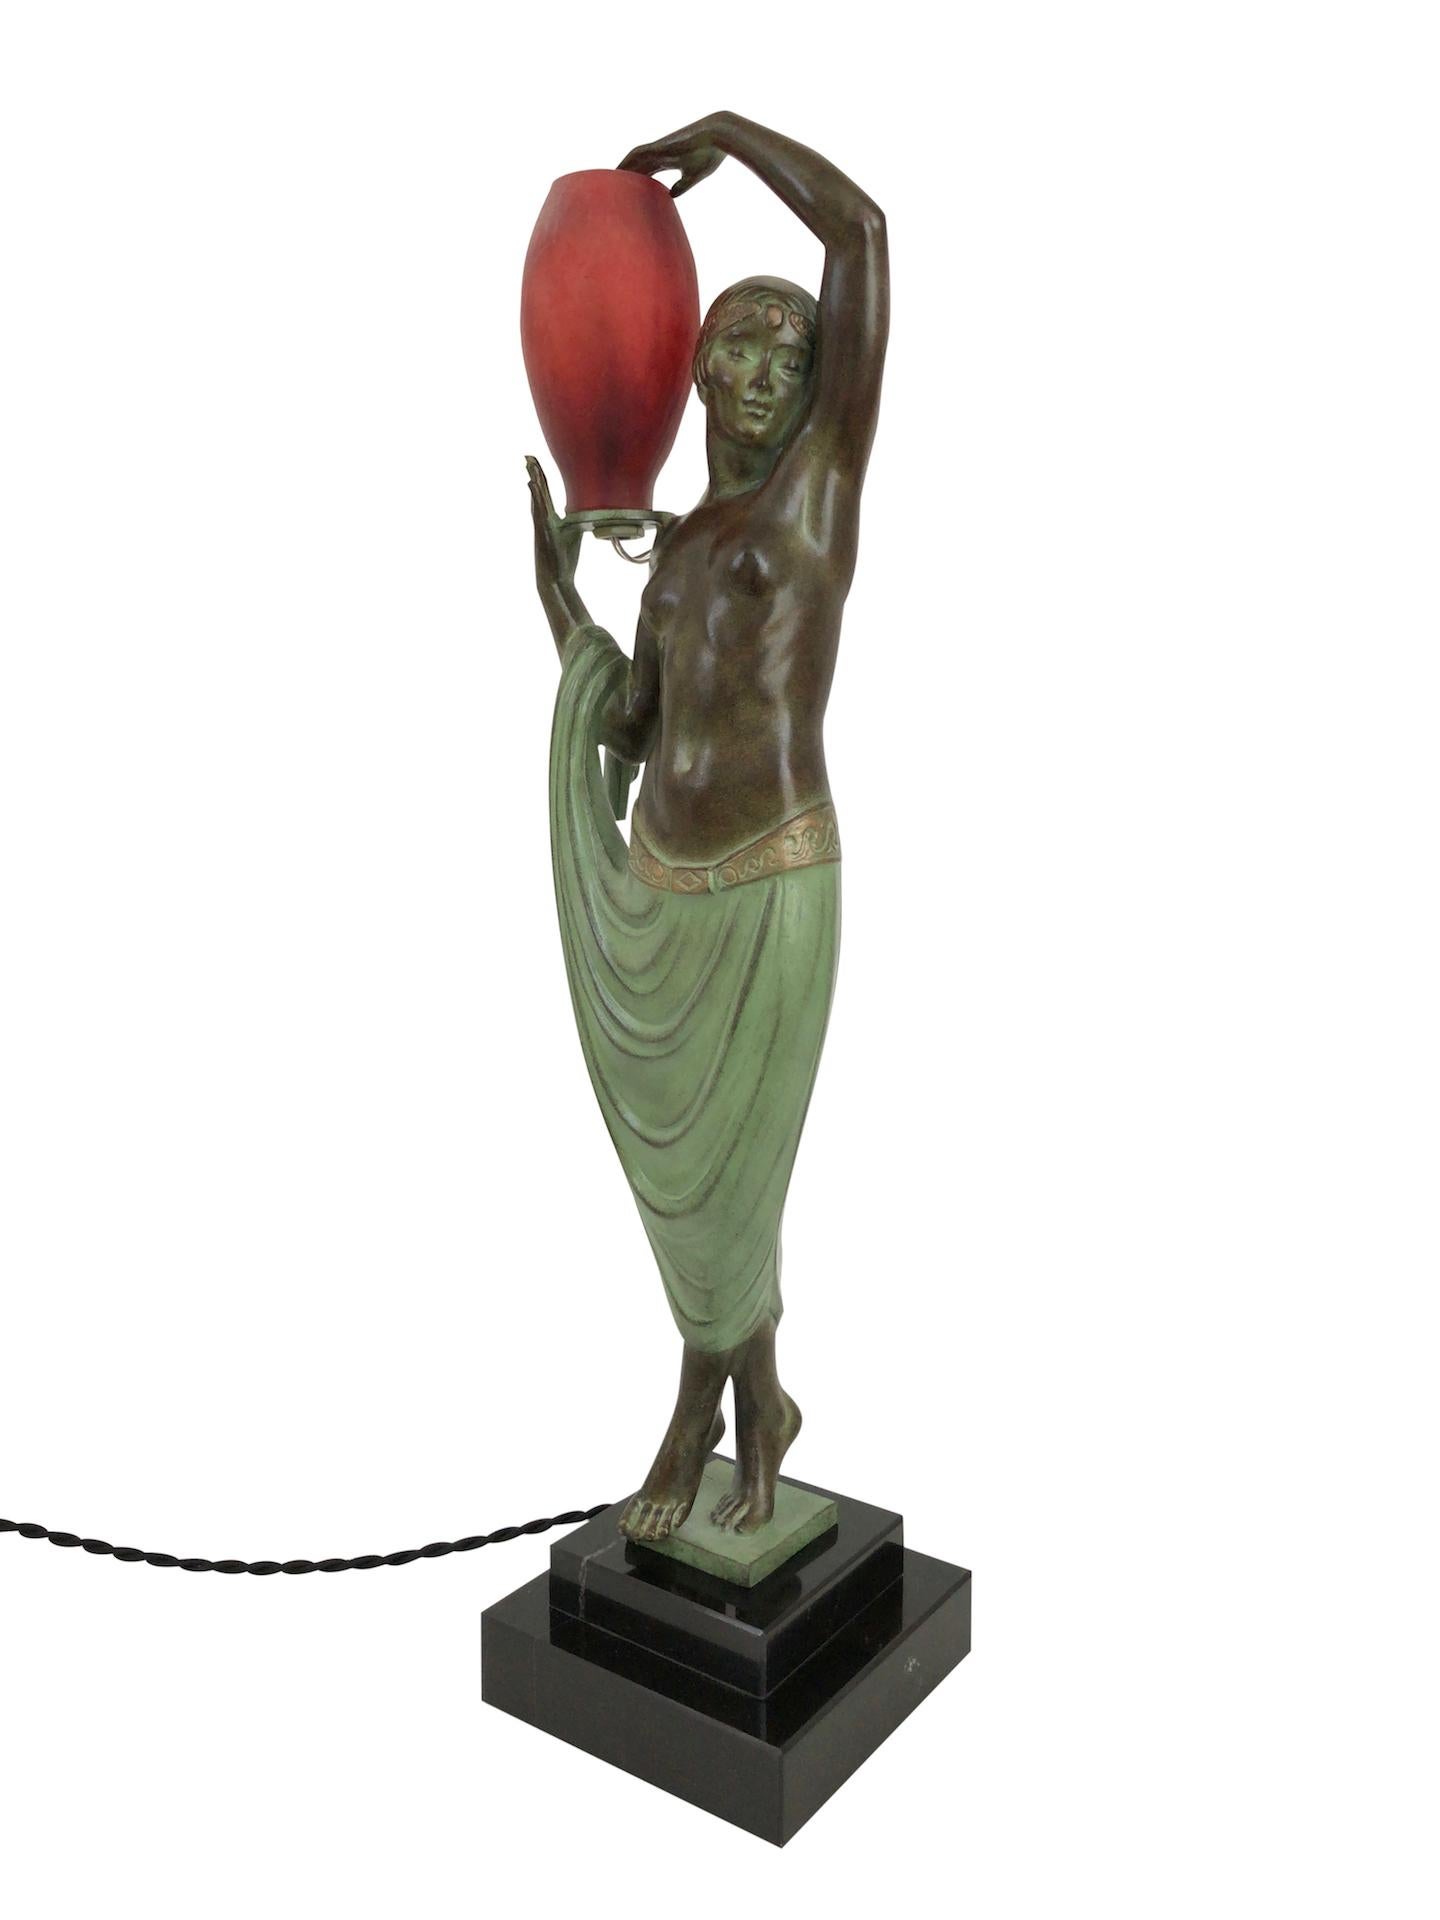 Lighted Art Deco Style Sculpture Lamp Odalisque by Fayral and Max Le Verrier  For Sale 1